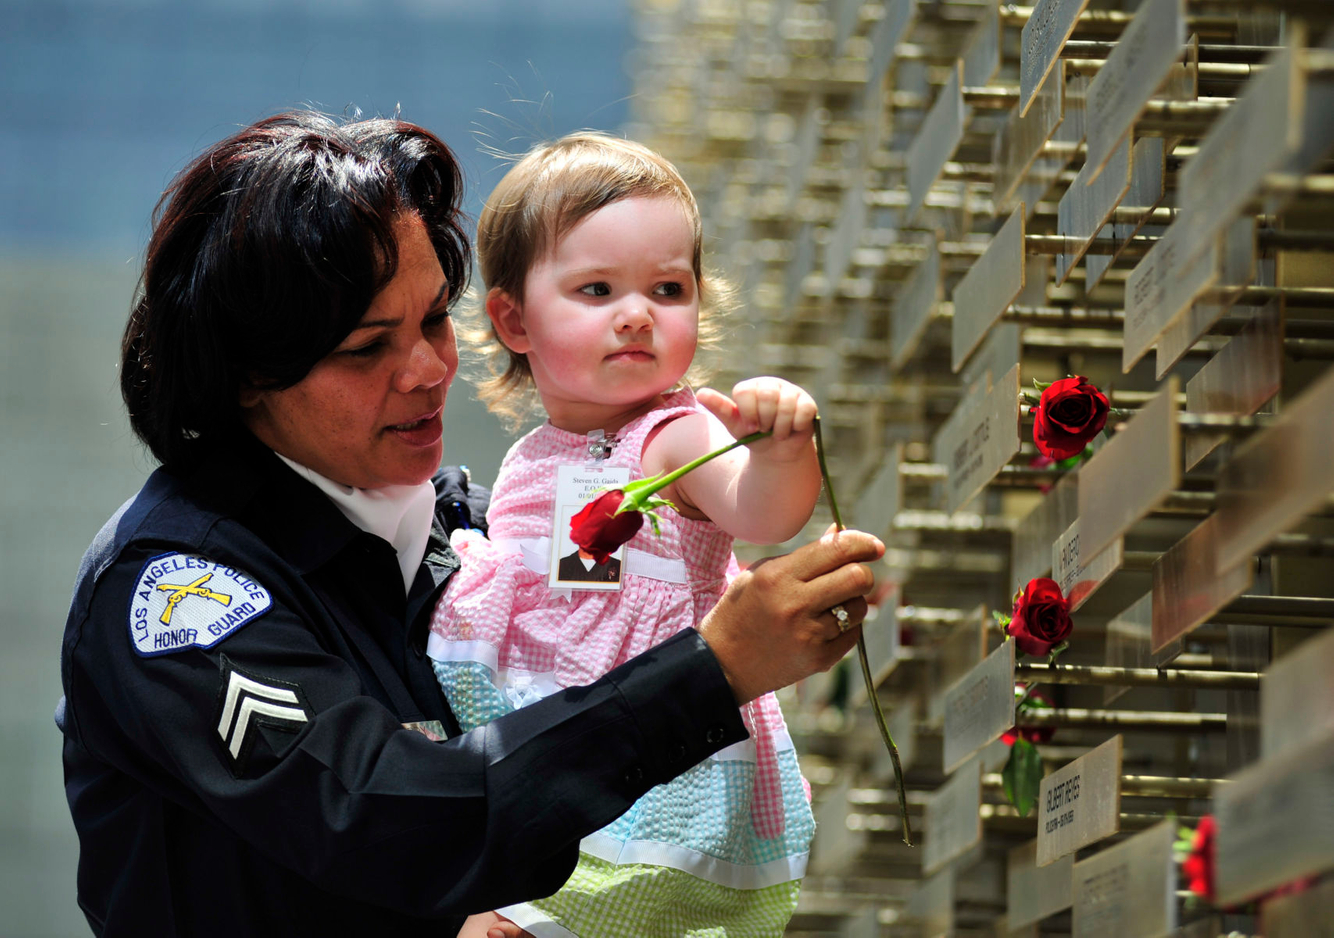 MEMORIAL: A member of th LAPD helps the niece of a fallen Officer place a rose at a memorial in Los Angeles